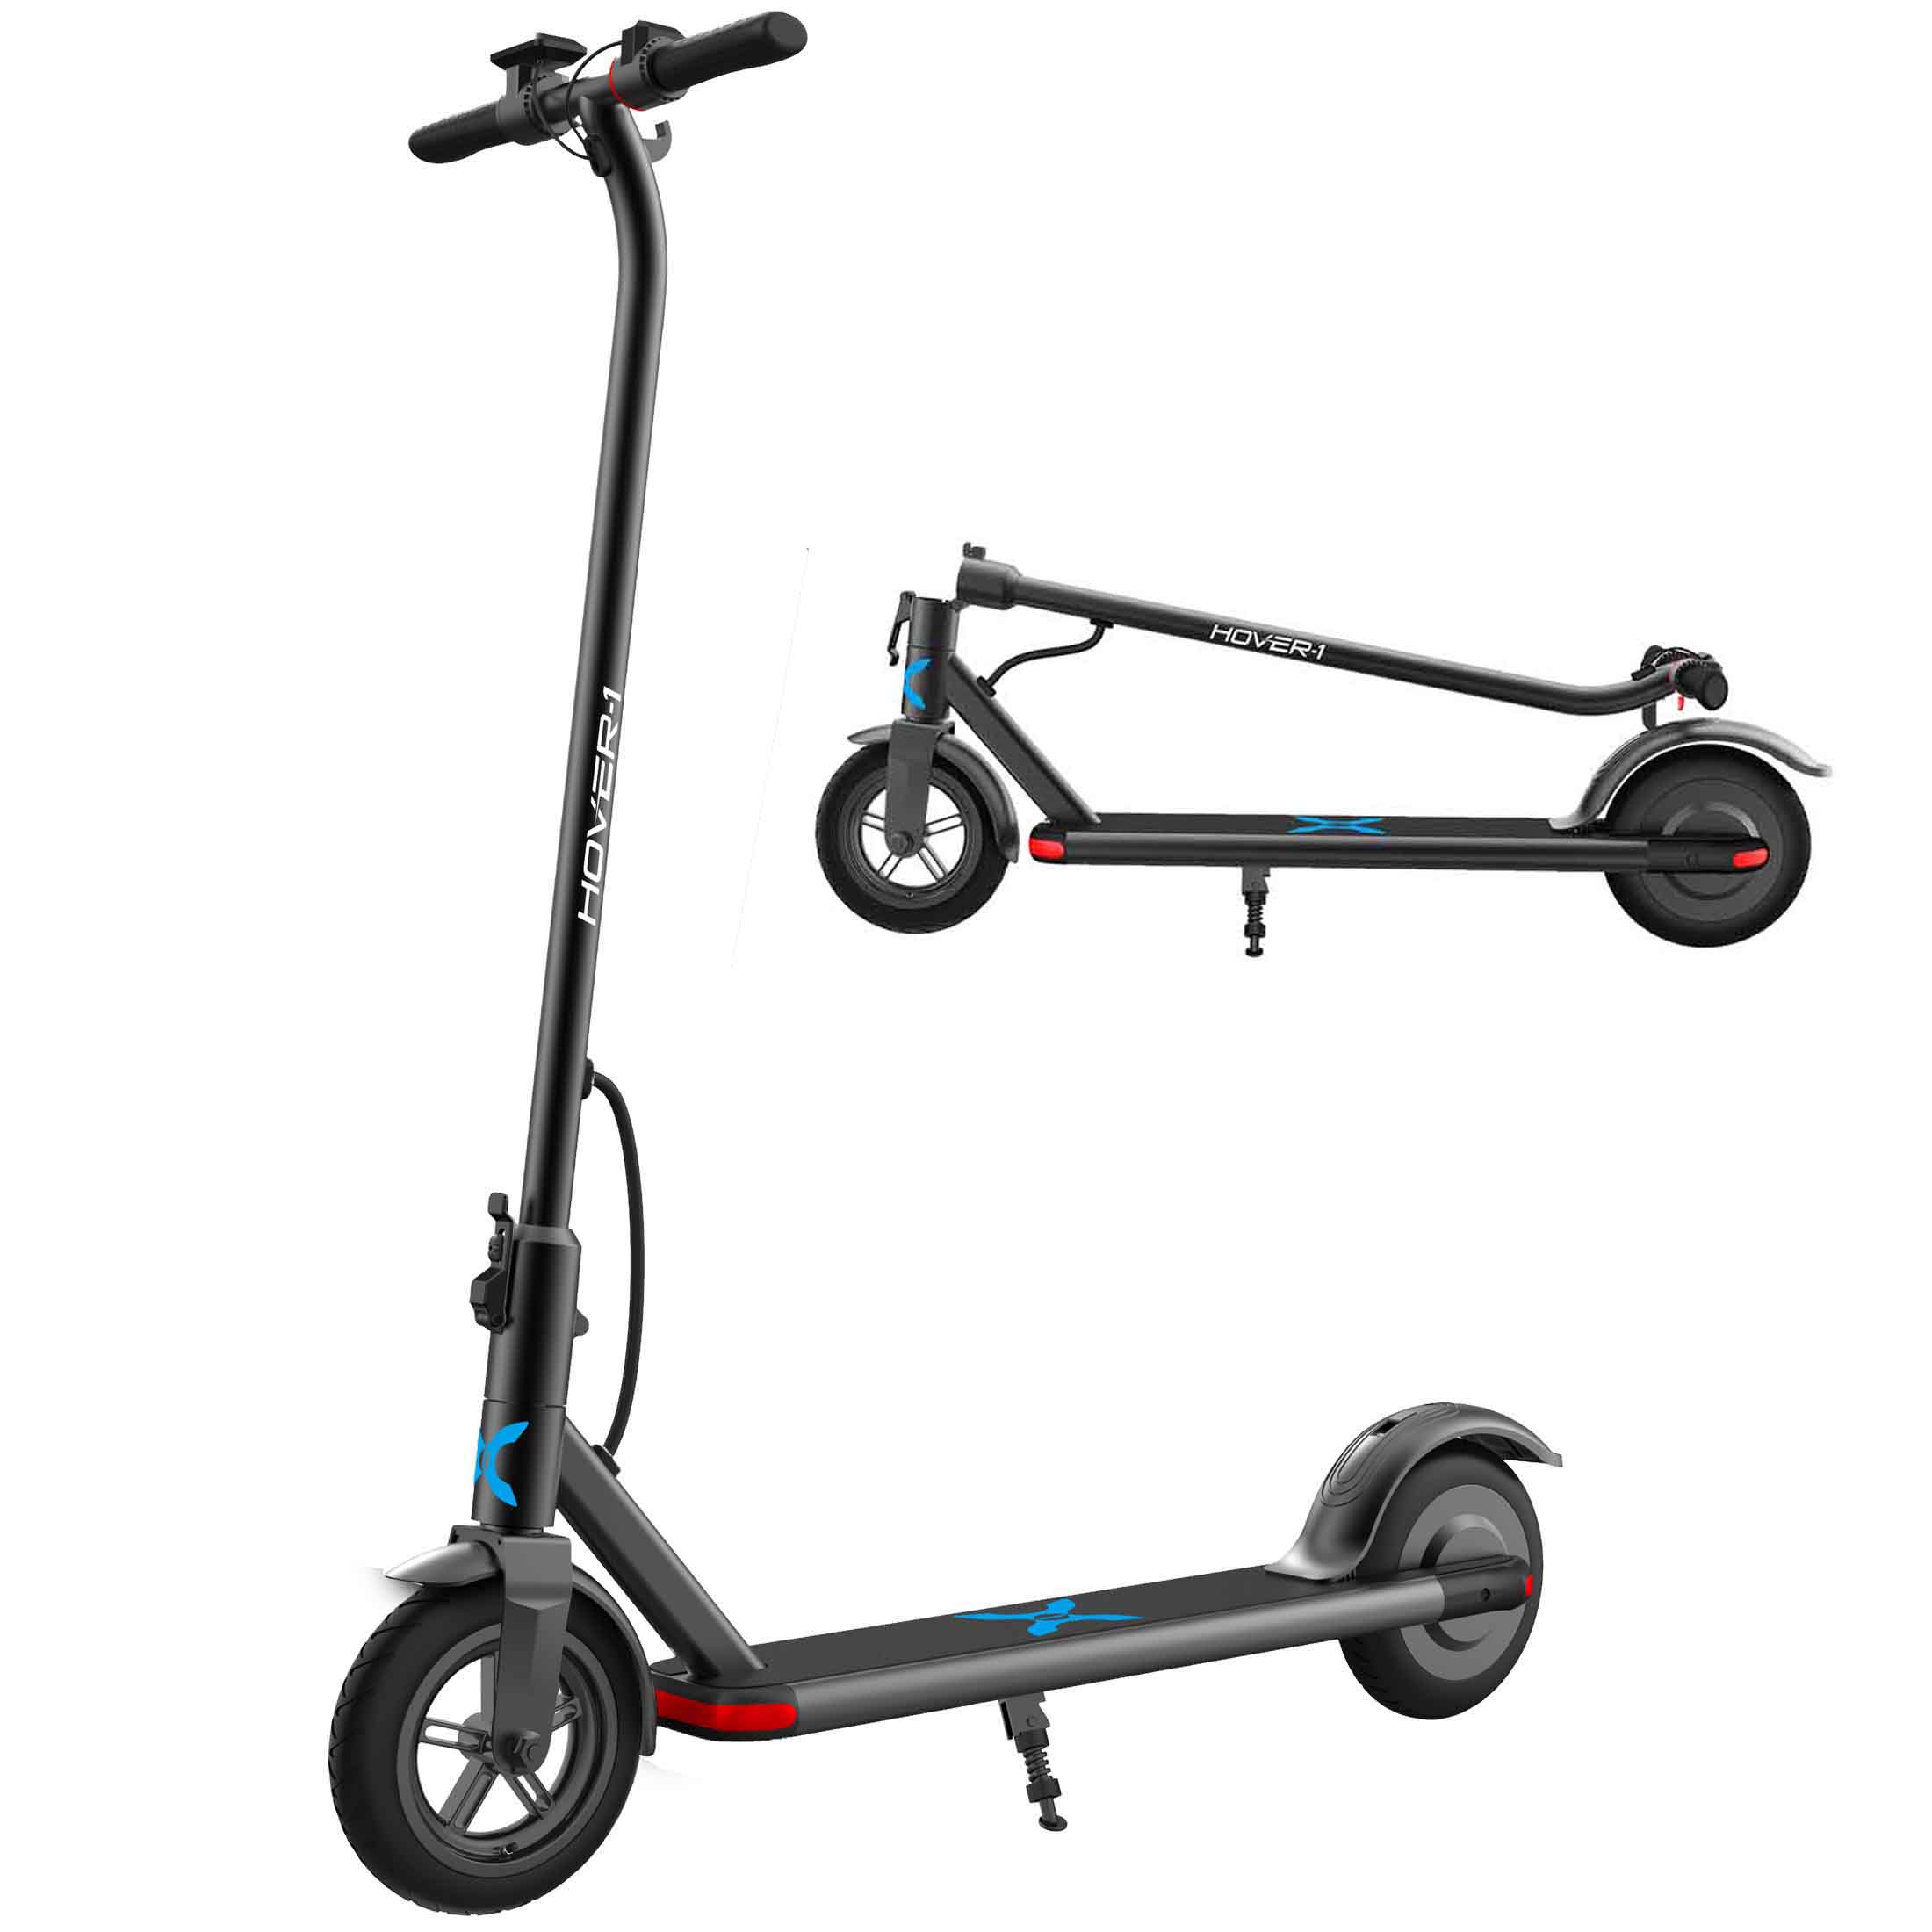 Hover-1 Dynamo Electric Scooter, LCD Display, Air-Filled Tires, 16 MPH Max Speed, Black, UL 2272 Certified - image 2 of 8